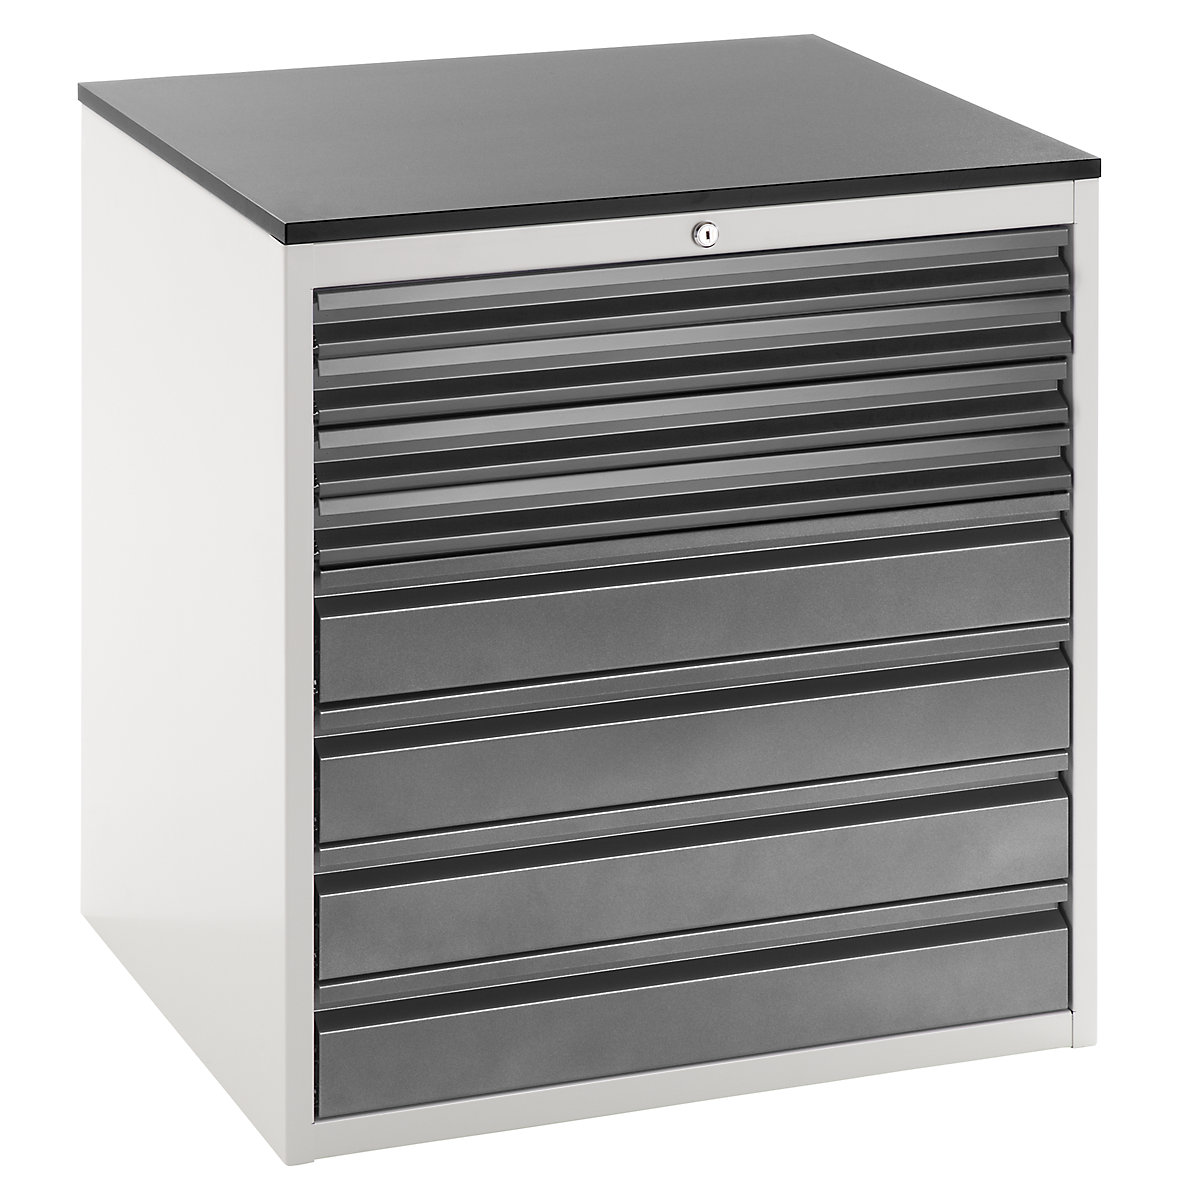 Drawer cupboard with telescopic guides – RAU, height 820 mm, drawers: 4 x 60, 4 x 120 mm, light grey / charcoal, width 770 mm-6